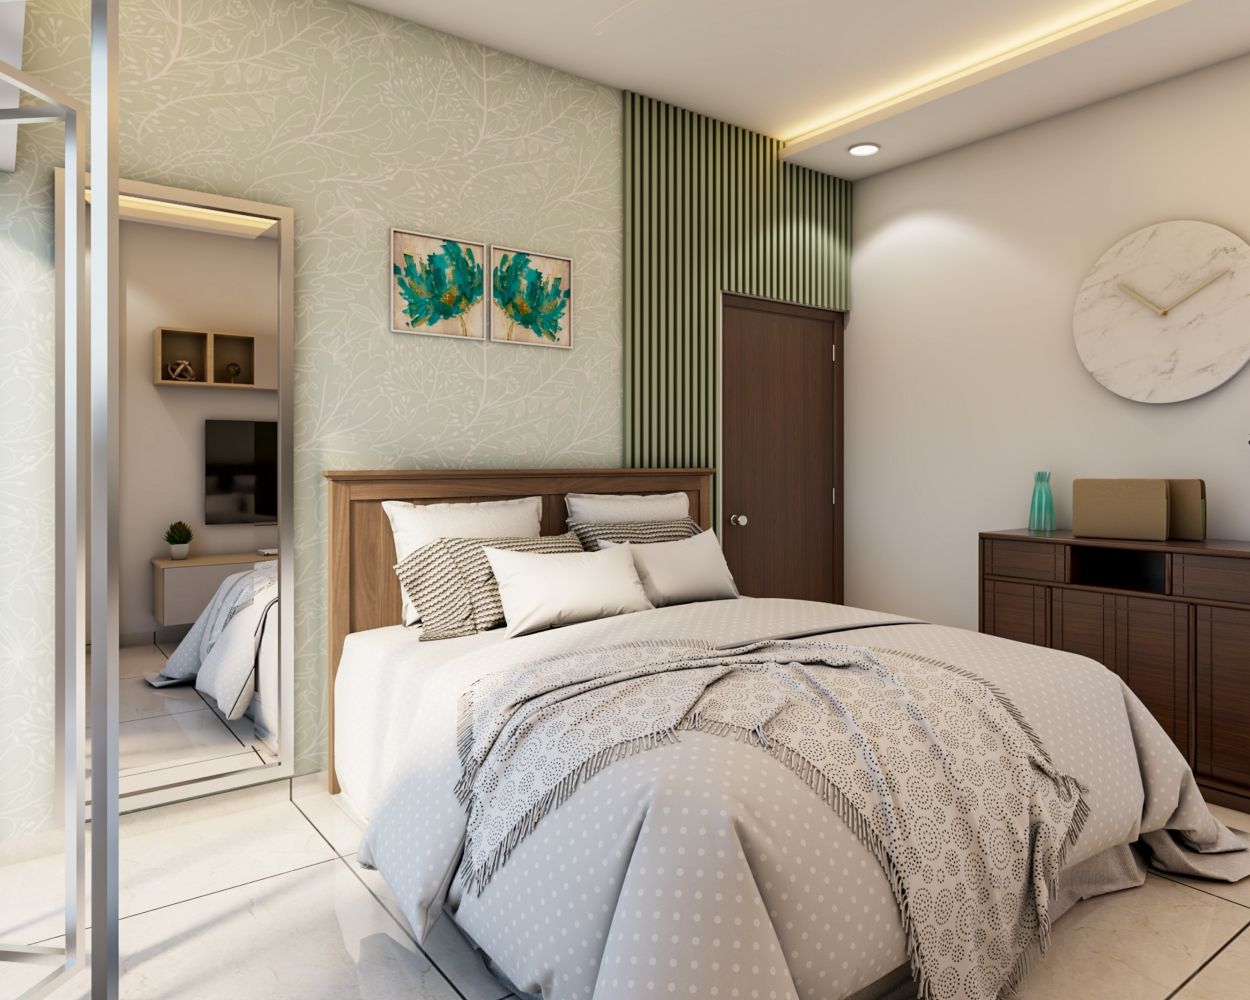 Modern Guest Room Design With Pastel Green Acent Wall And Leafy Motifs